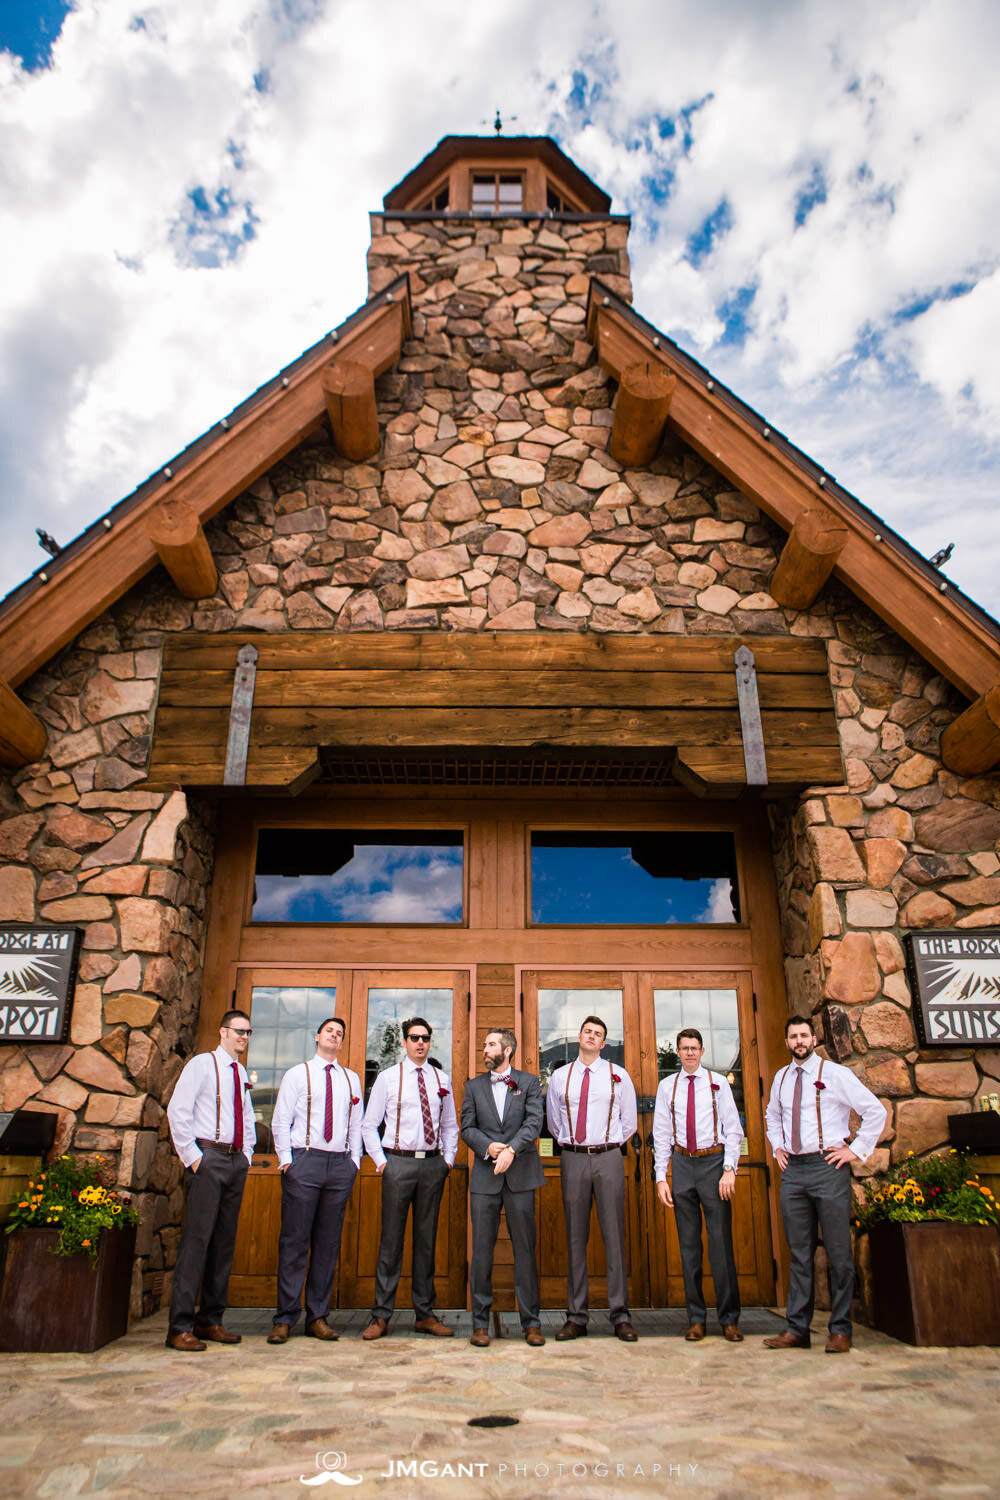  Wedding party photos for a Winter Park, mountain wedding at the Lodge at Sunspot, photographed by JMGant Photography 